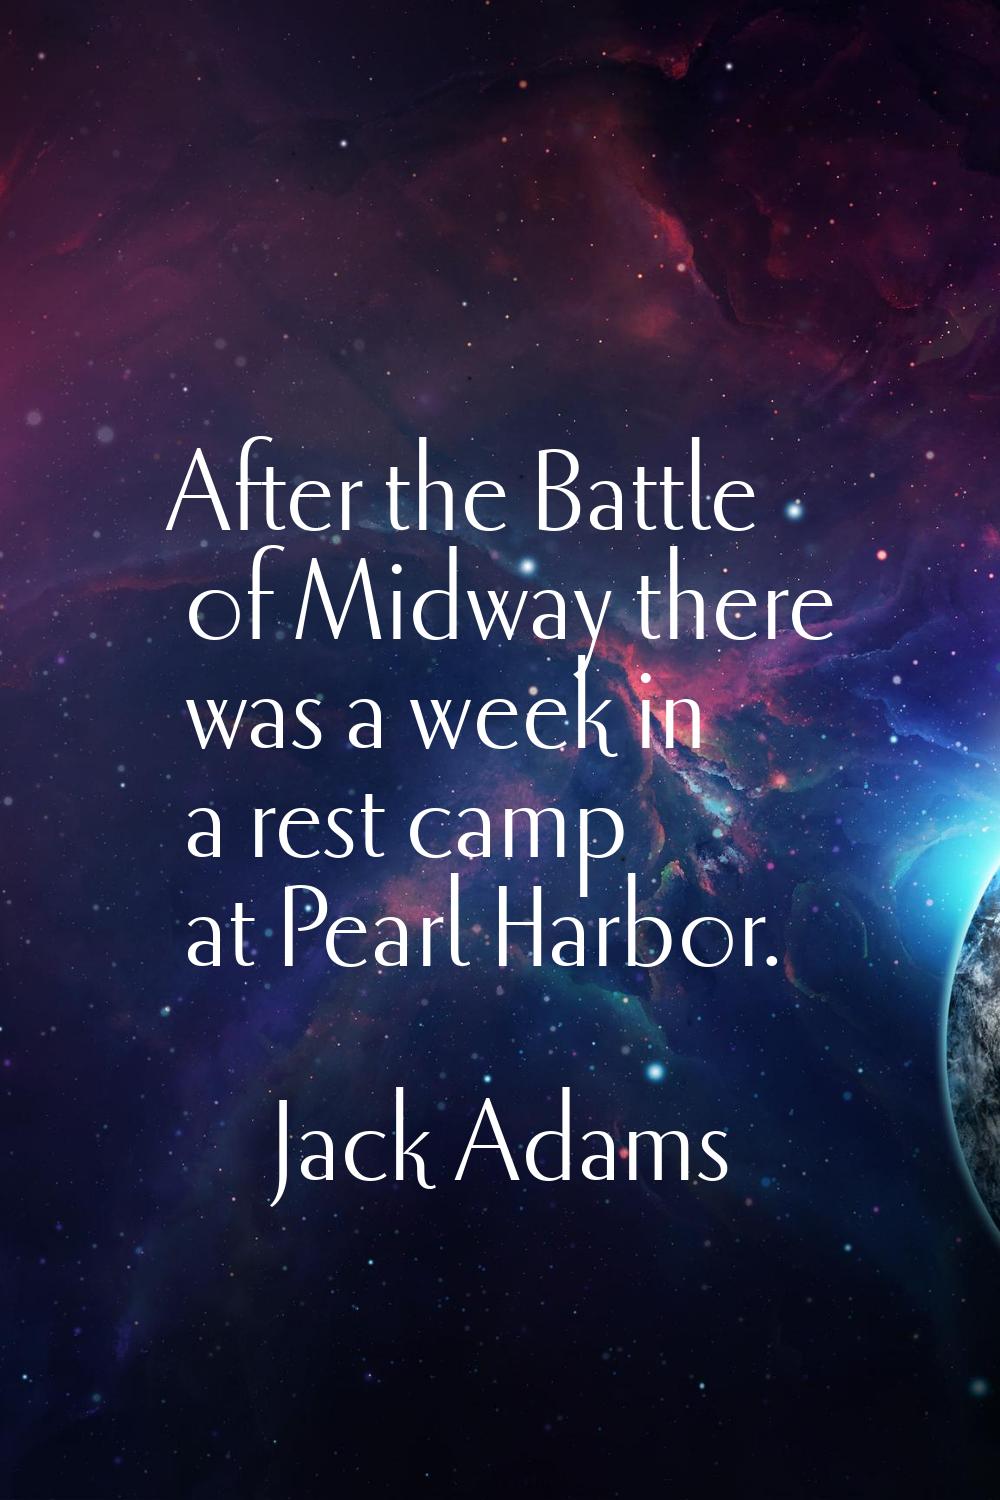 After the Battle of Midway there was a week in a rest camp at Pearl Harbor.